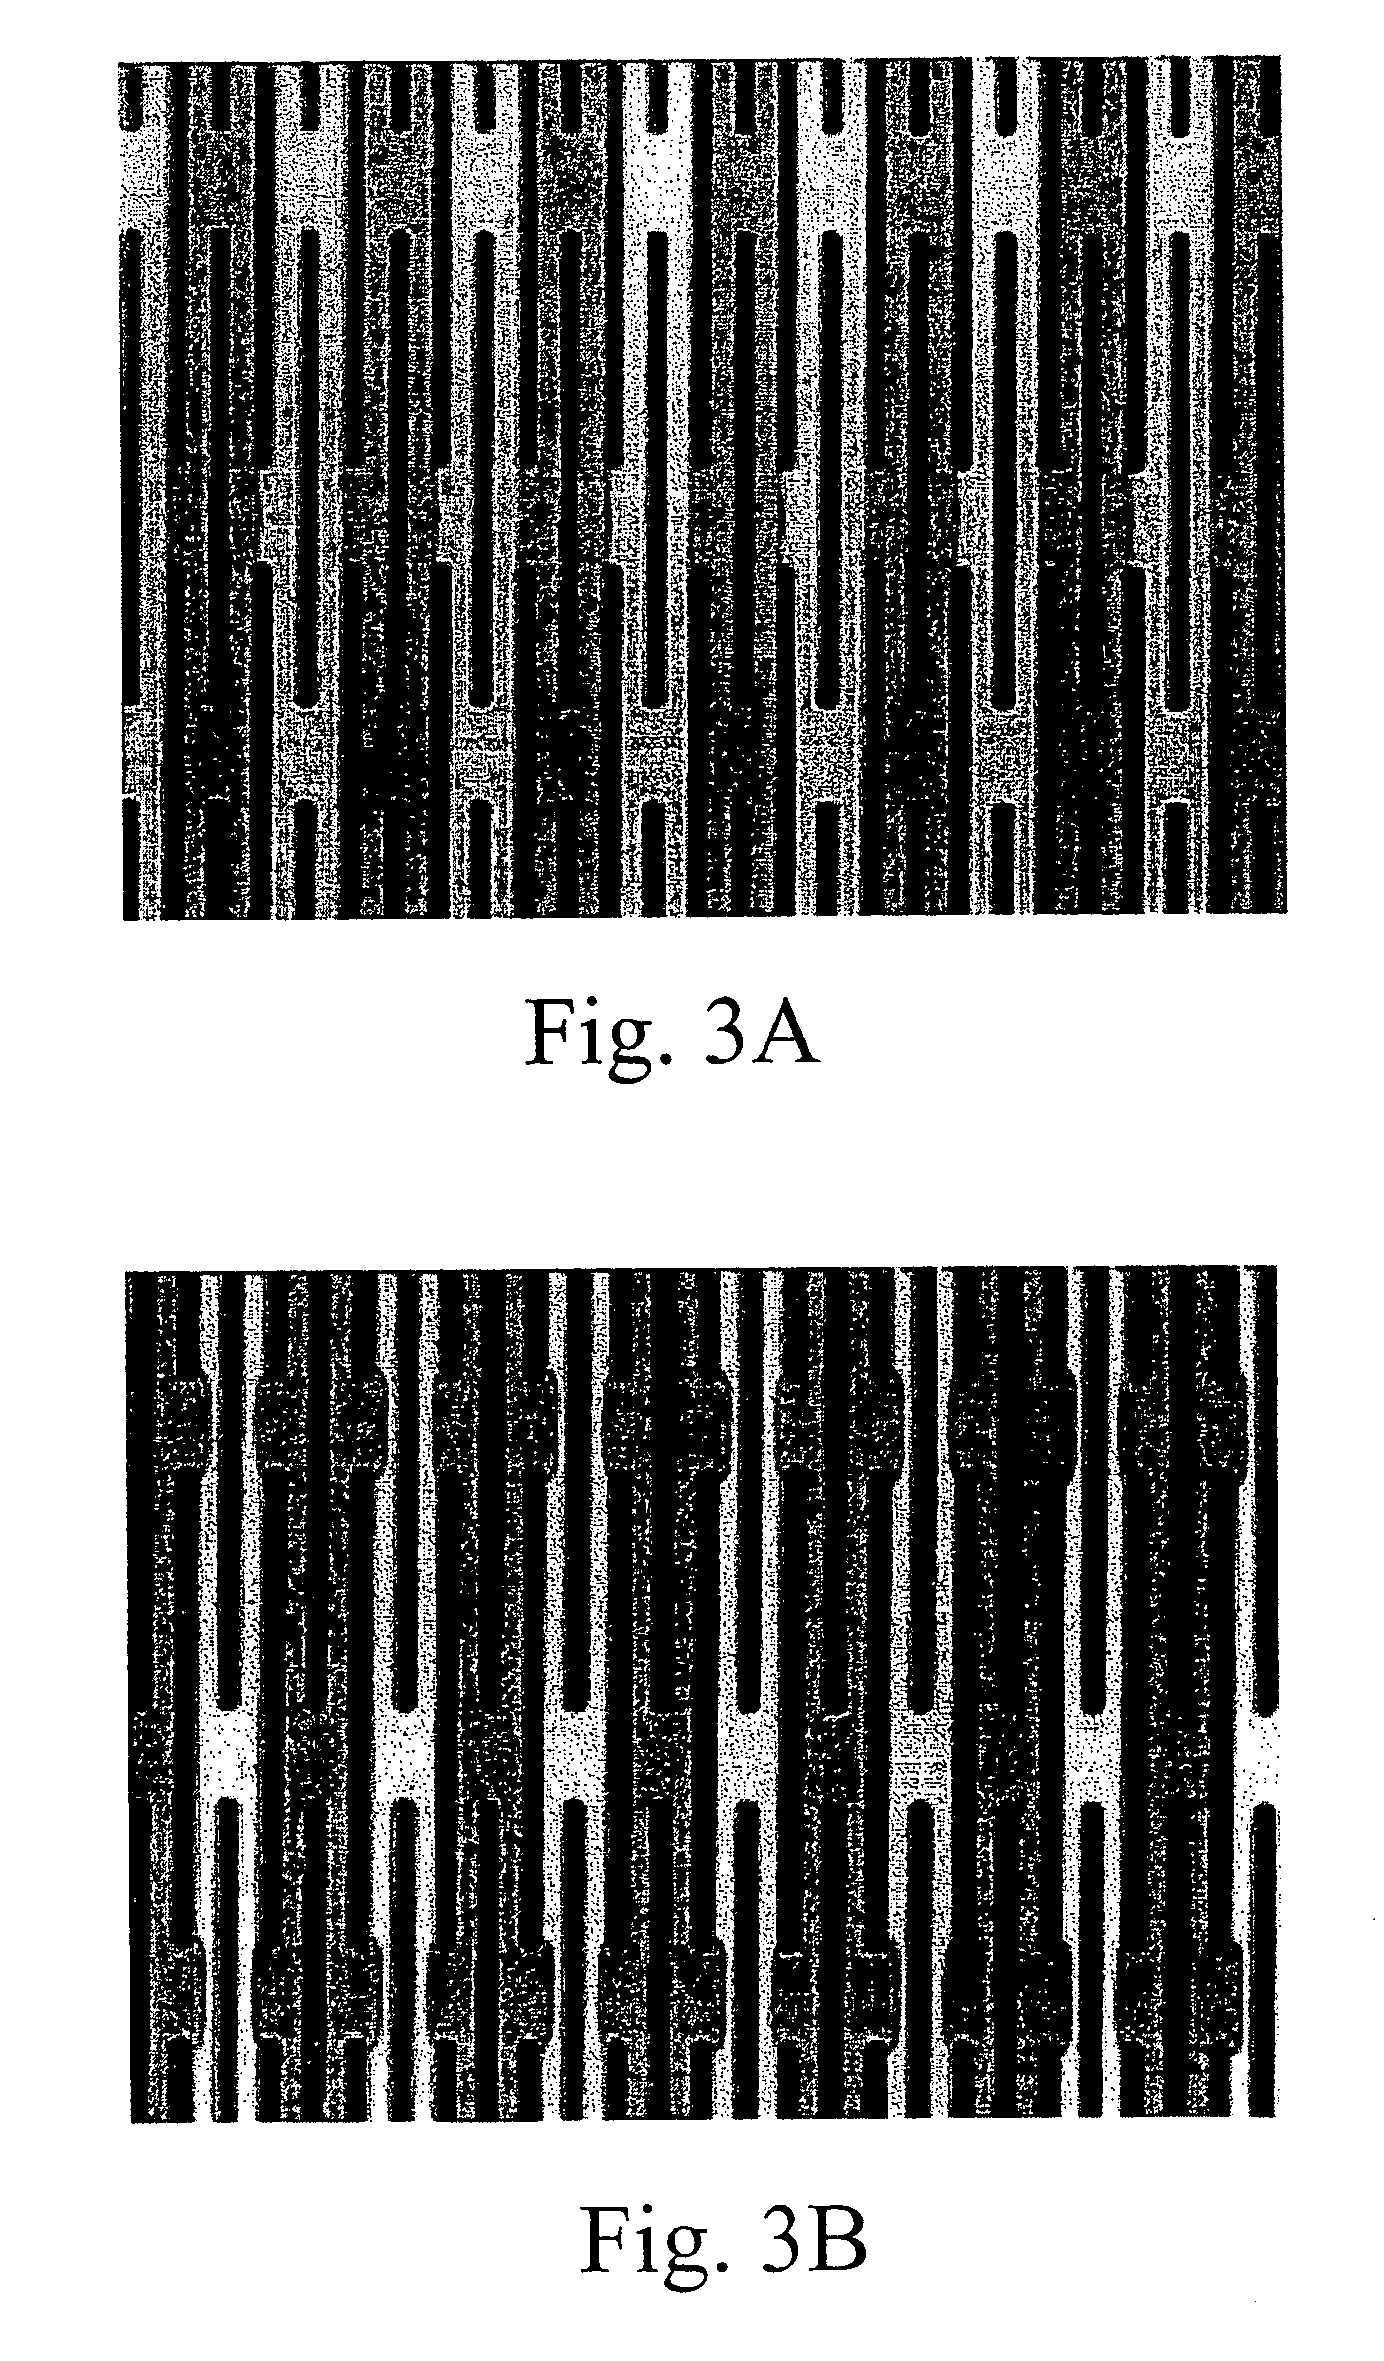 Methods and compositions for detecting non-hematopoietic cells from a blood sample